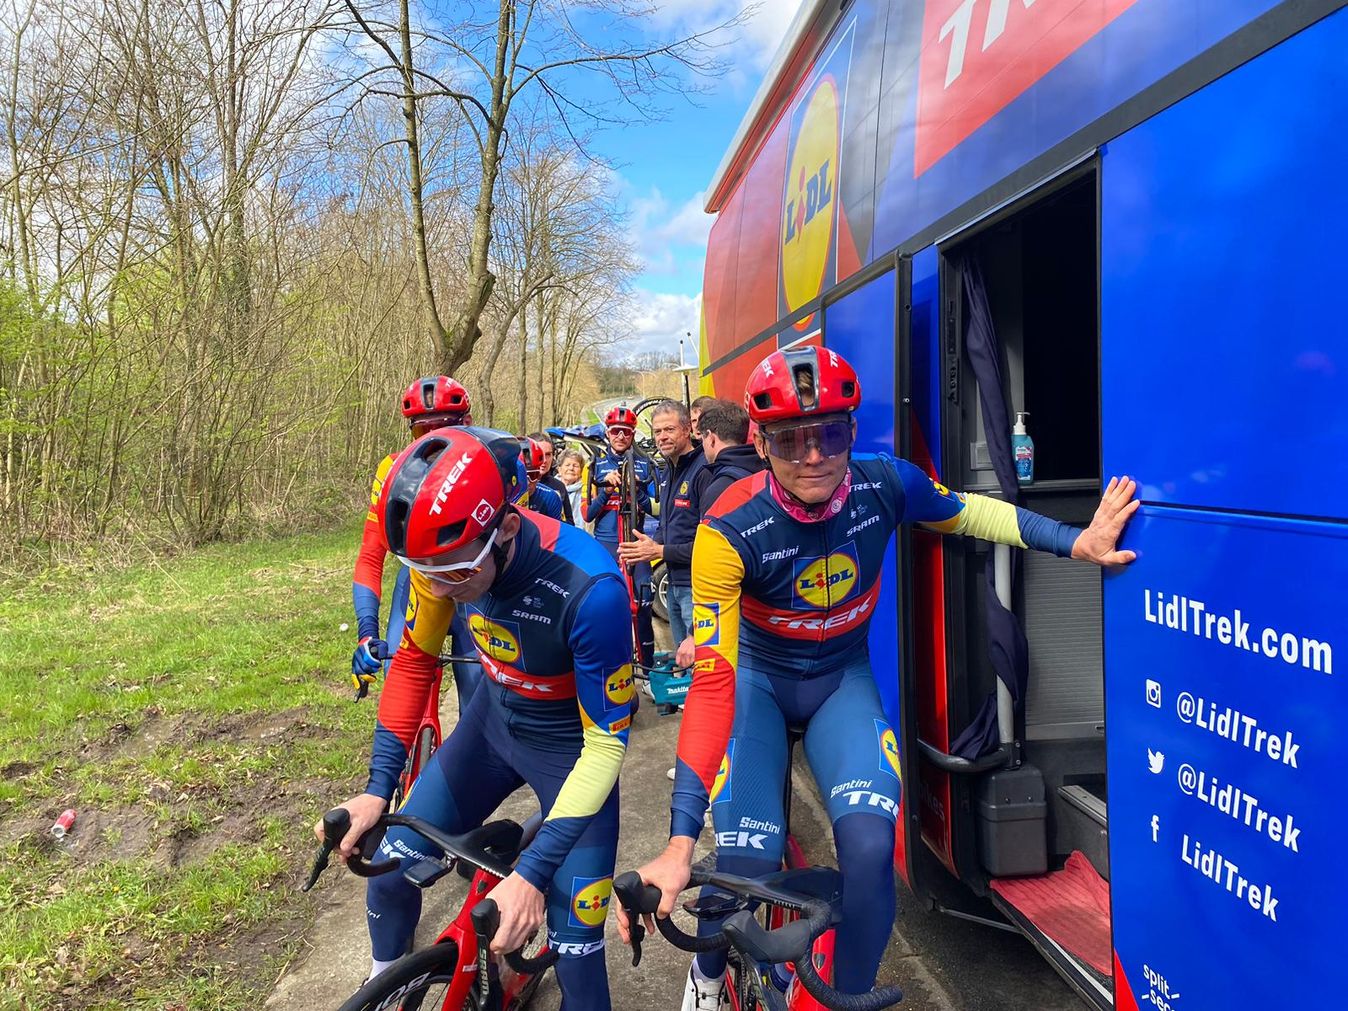 Lidl-Trek head out for their Flanders recon on Thursday, without Pedersen